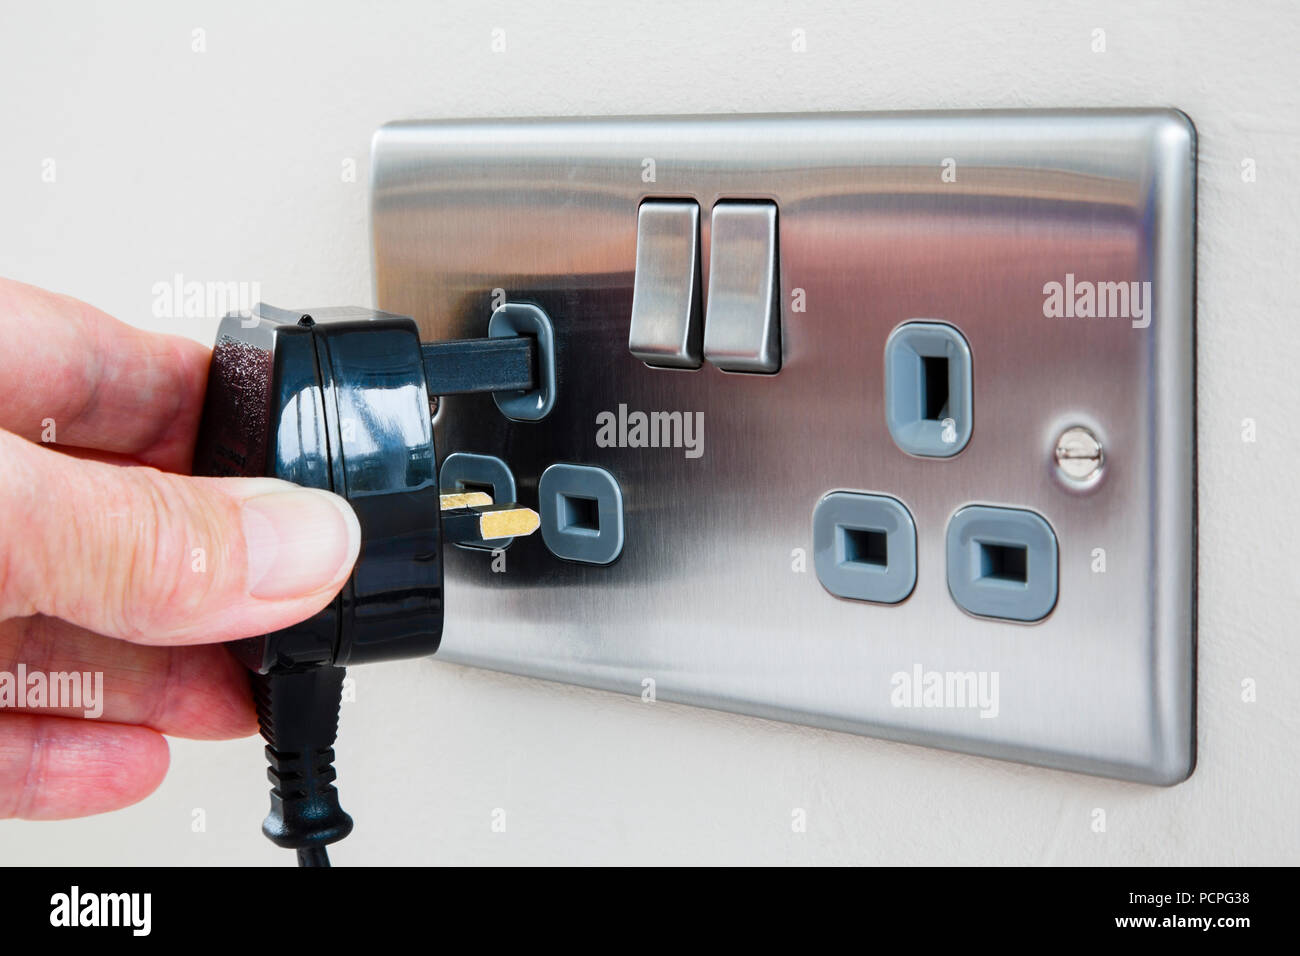 A person's hand holding an unplugged three pin plug and plugging it in to an electric wall socket switched off. England, UK, Britain Stock Photo